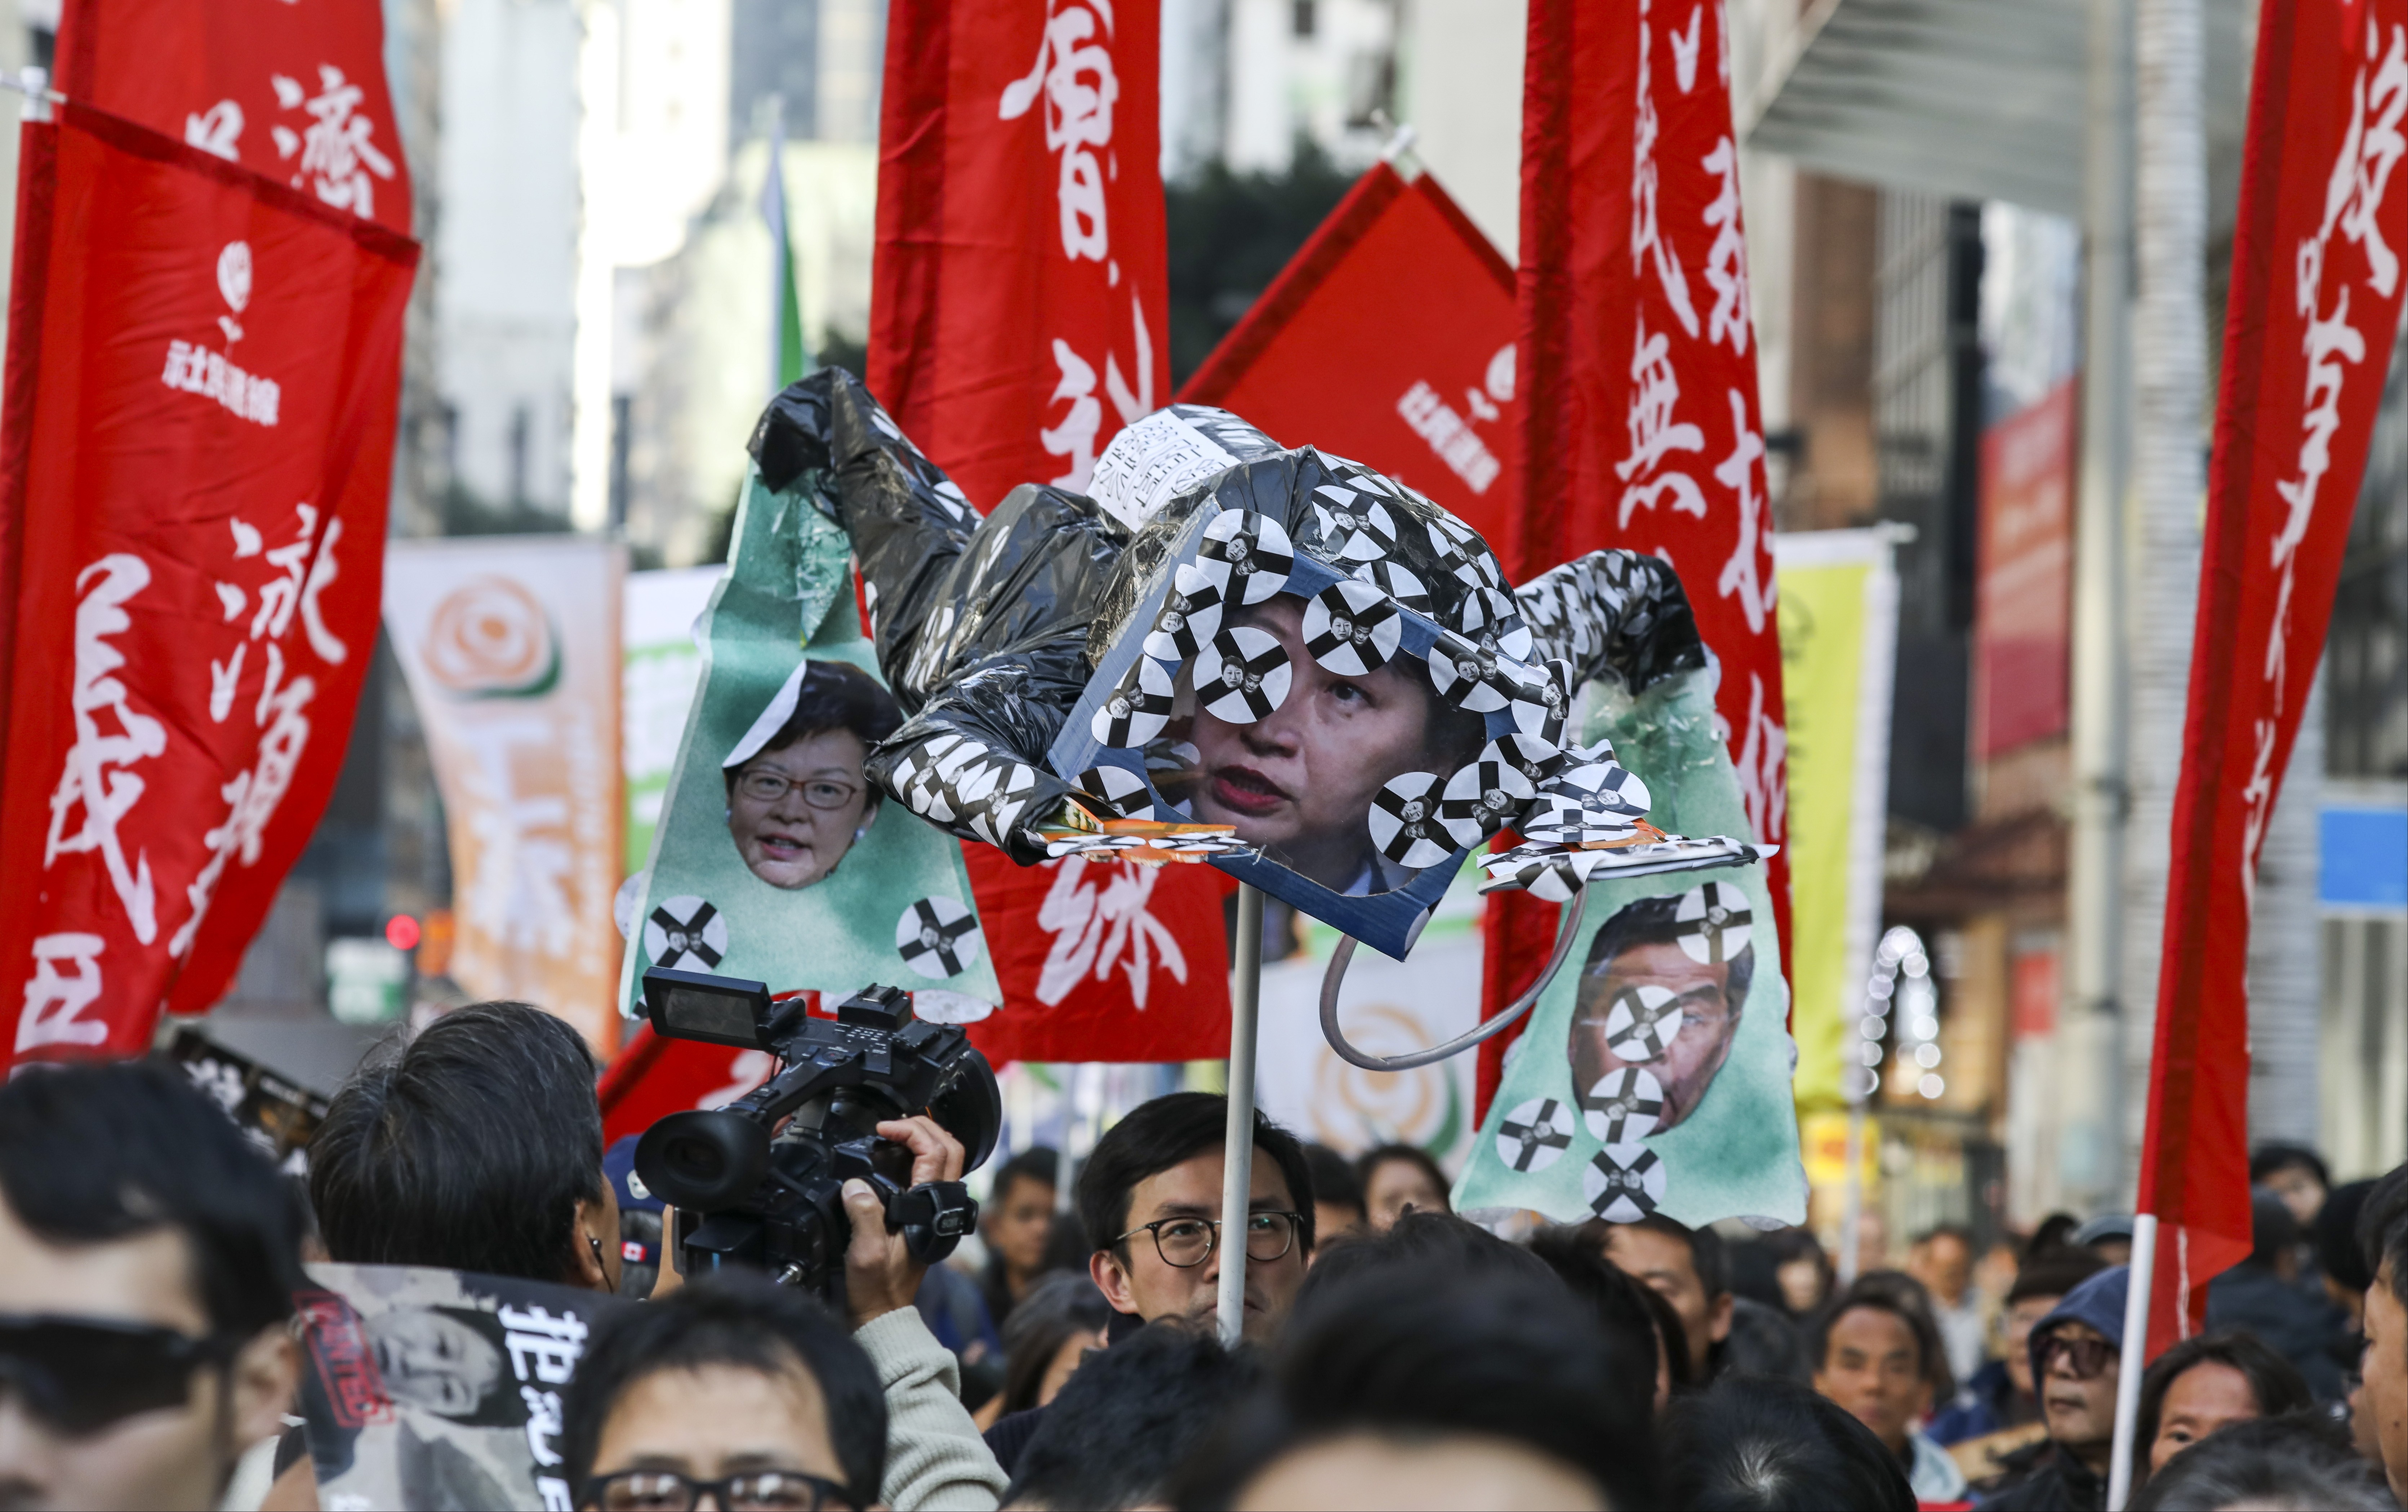 A prop featuring Secretary for Justice Teresa Cheng is seen at the New Year’s Day rally in Causeway Bay. Photo: Nora Tam